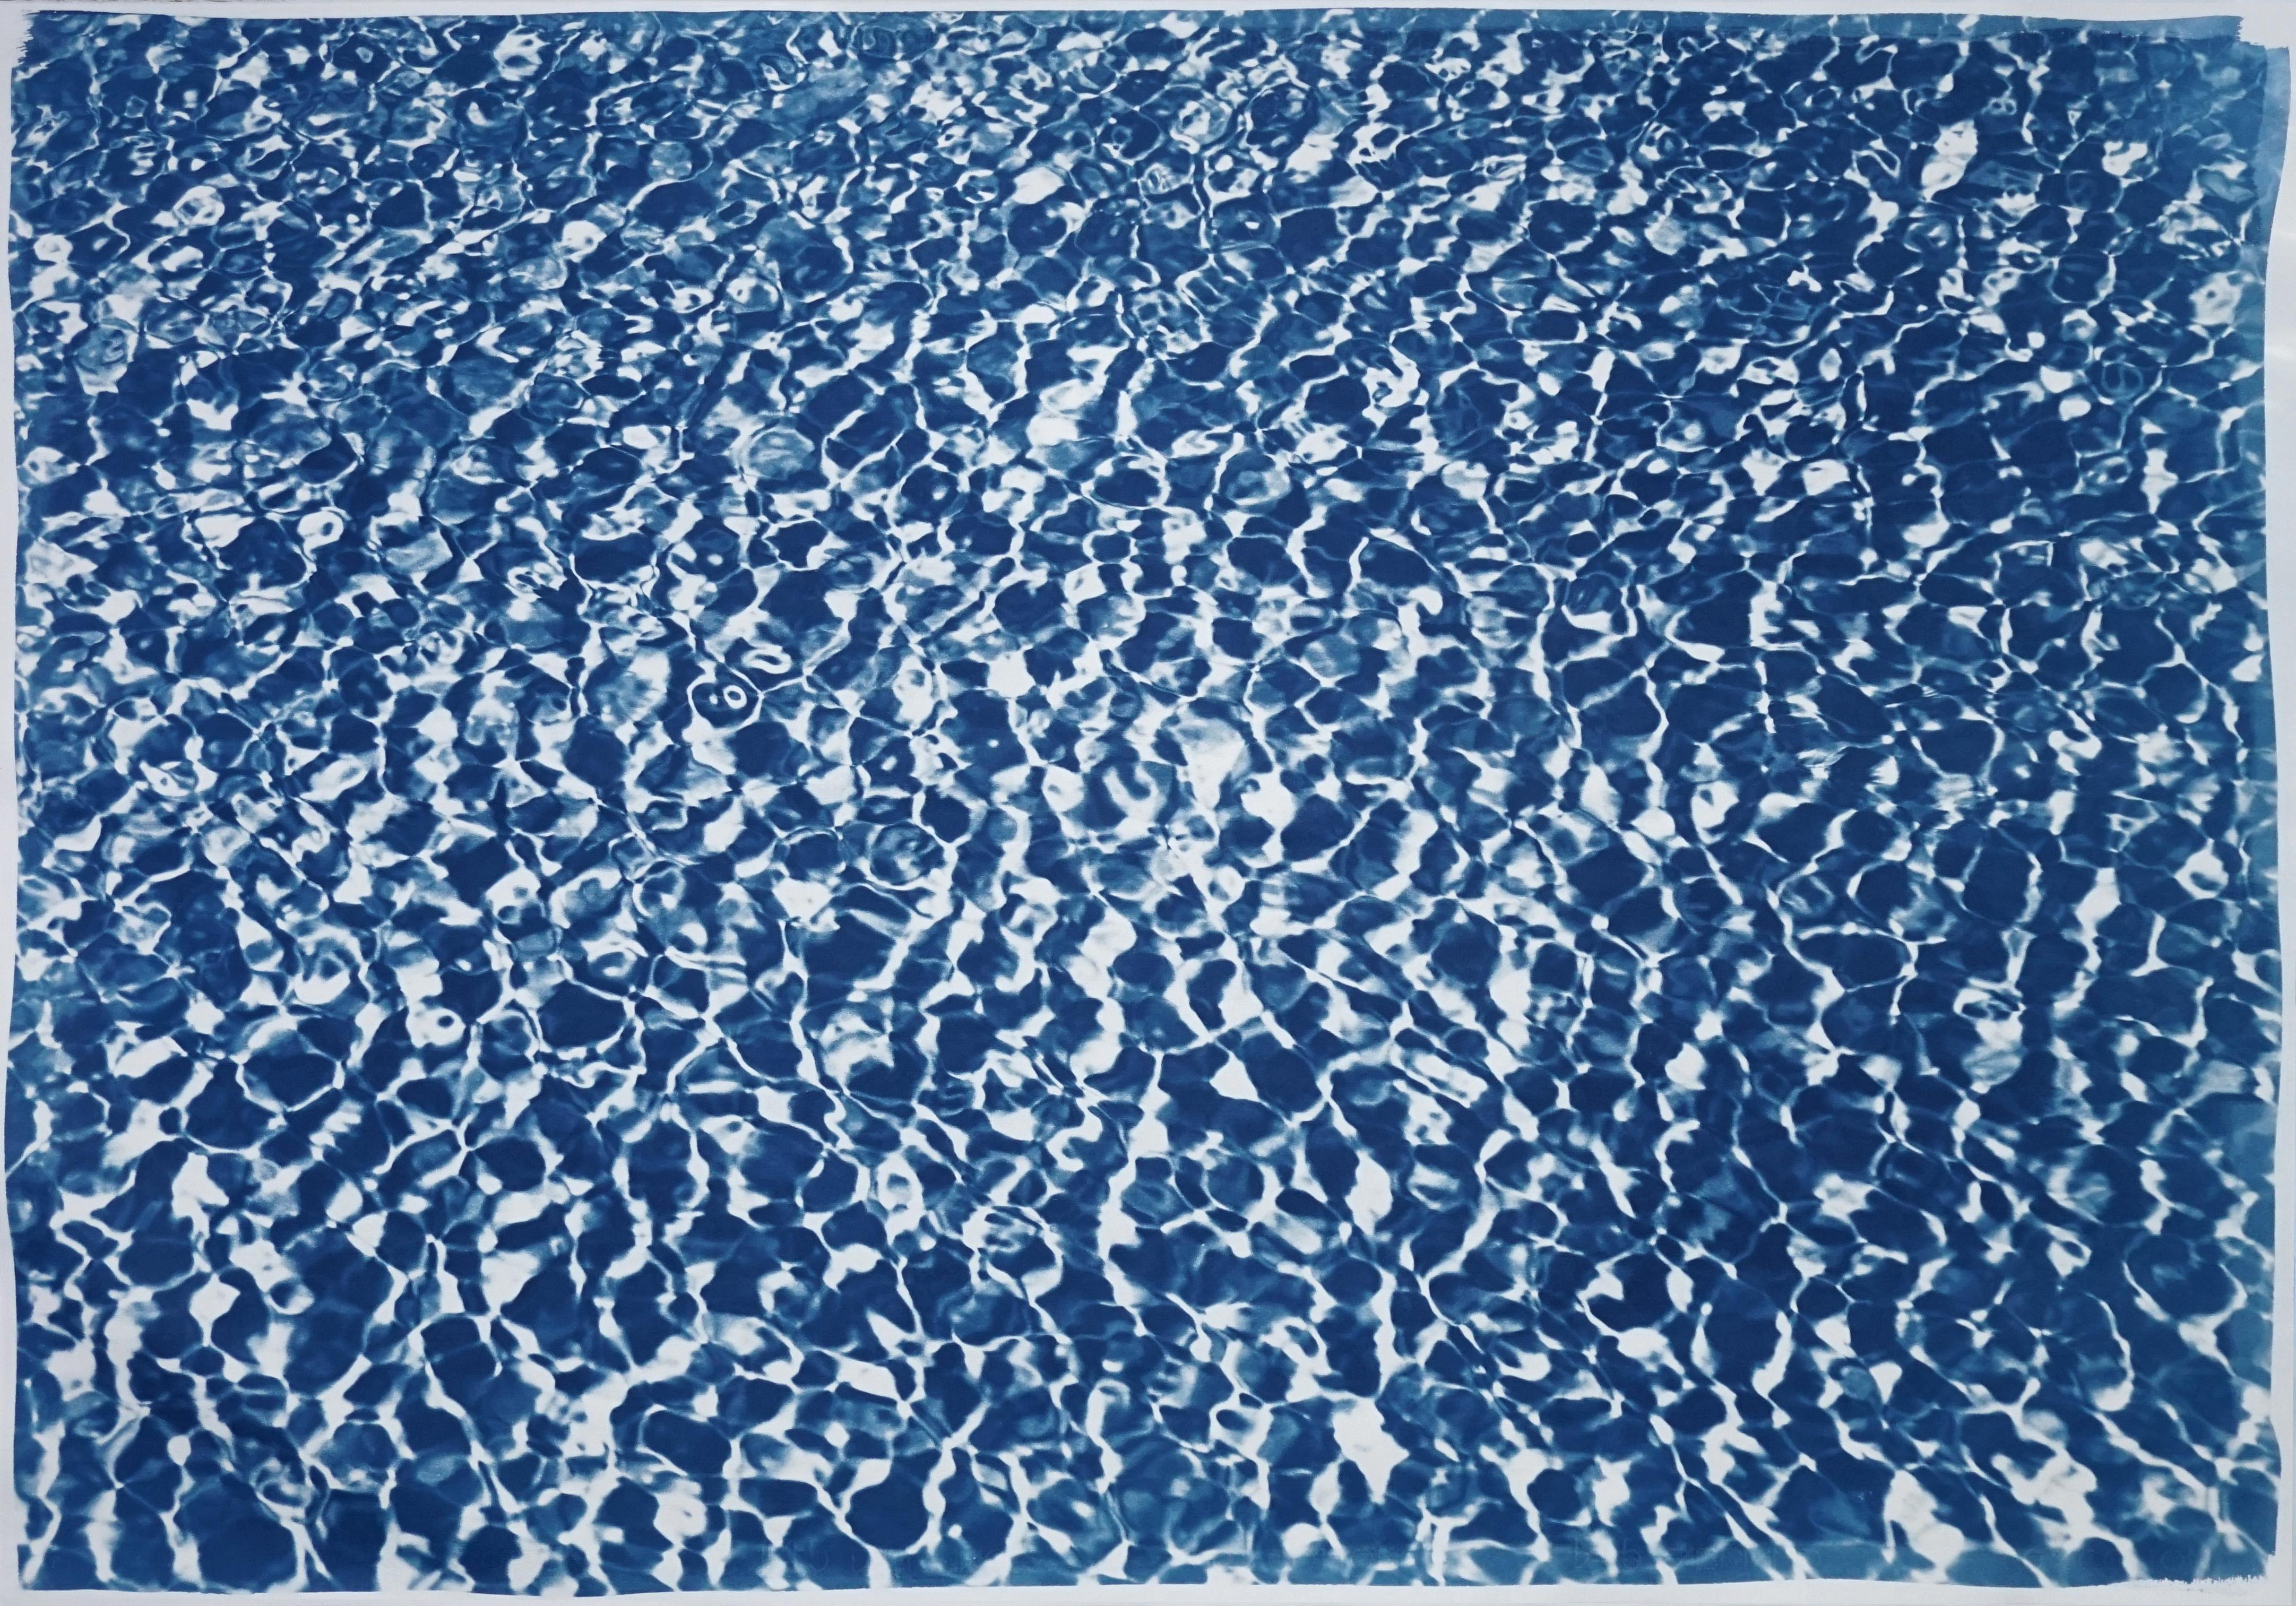 Kind of Cyan Abstract Print - Handmade Cyanotype of Infinity Pool Water Reflecctiona, Blue and White on Paper